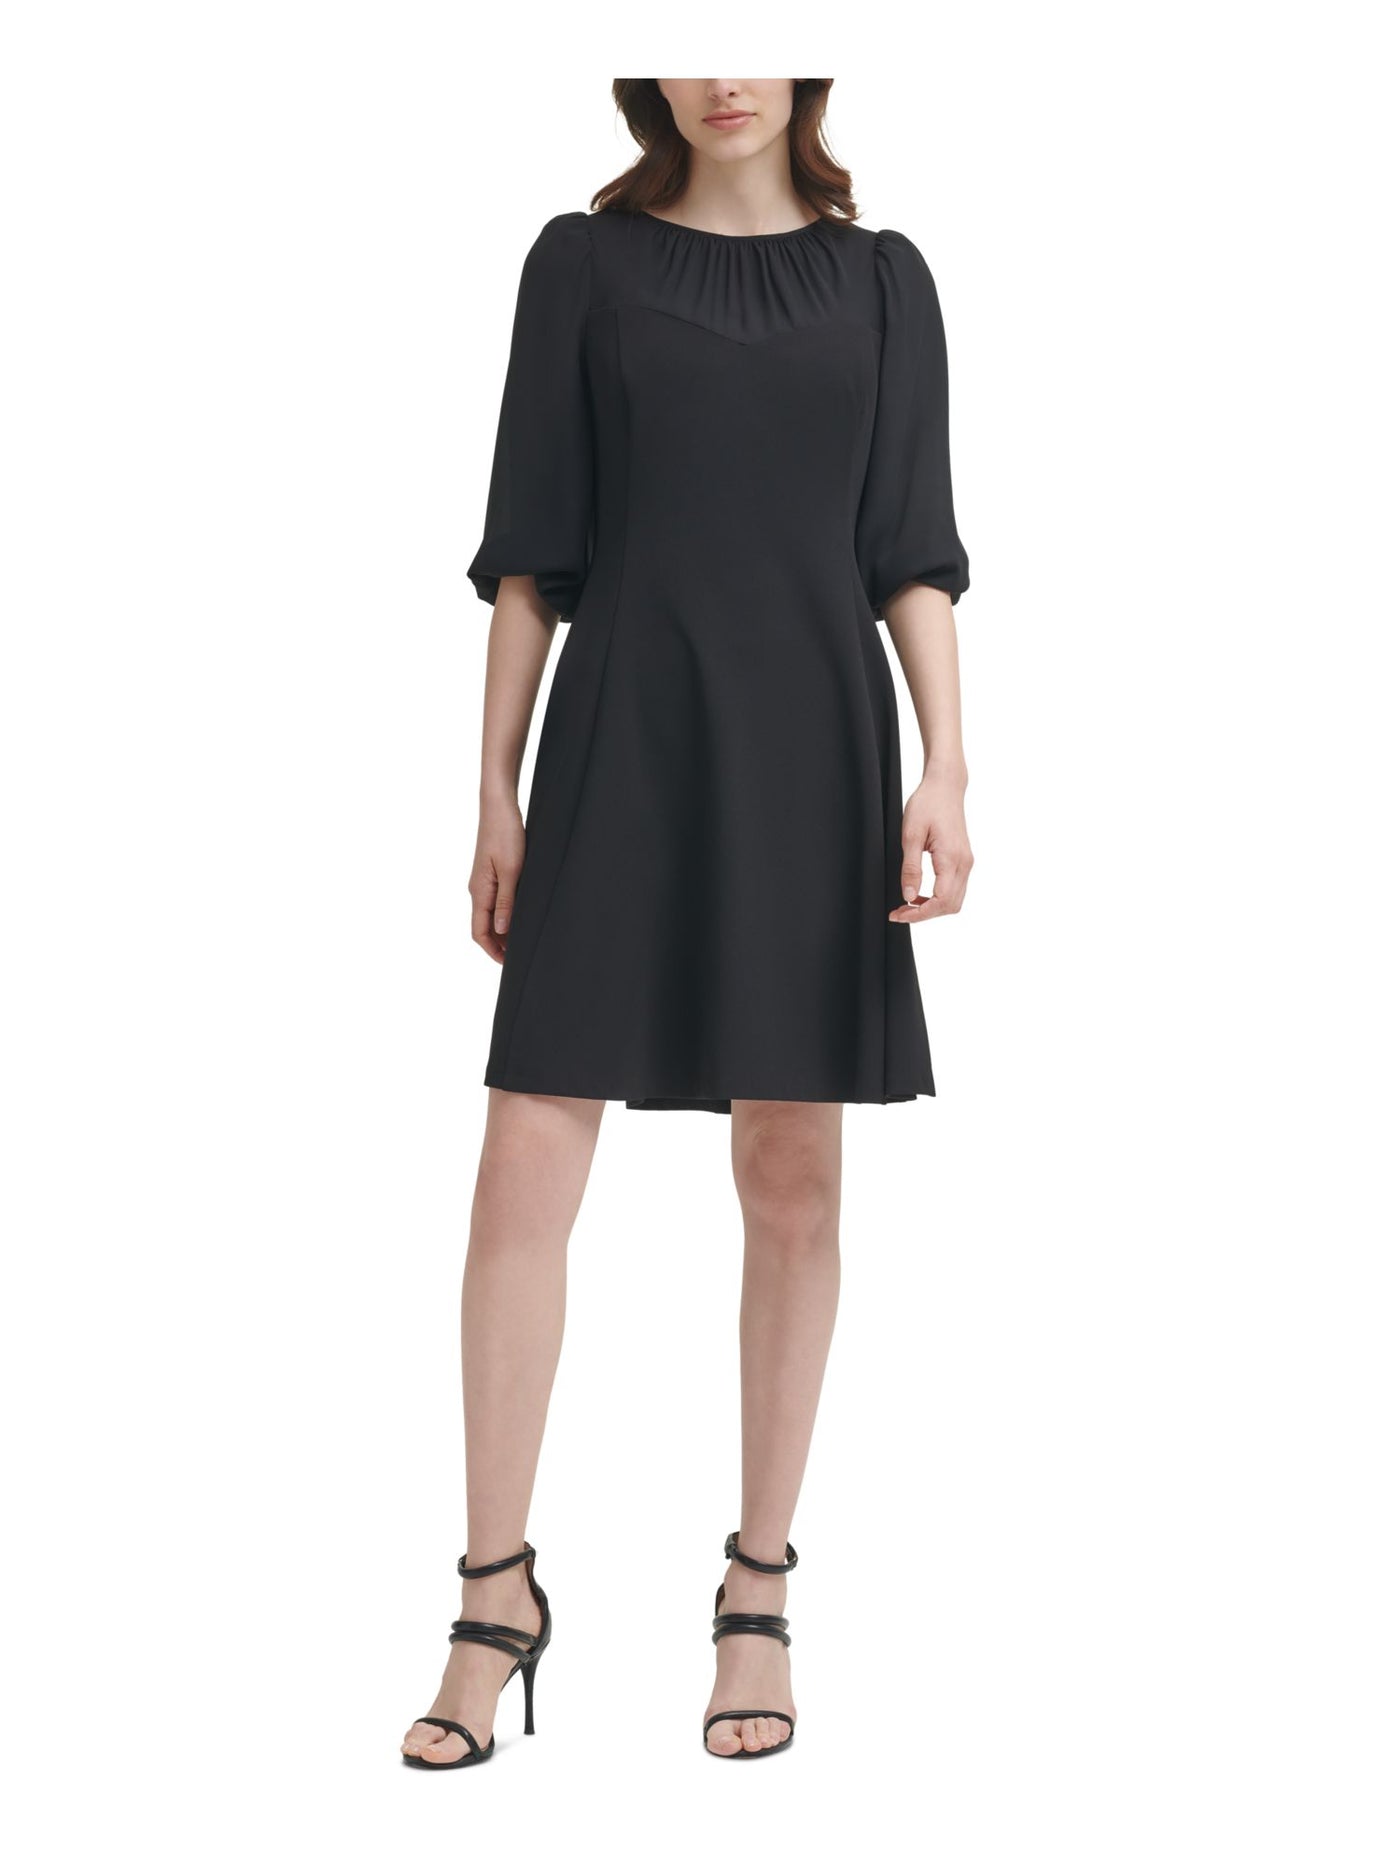 DKNY Womens Black Zippered Sheer Keyhole Back Unlined Pouf Sleeve Round Neck Above The Knee Cocktail Fit + Flare Dress 10